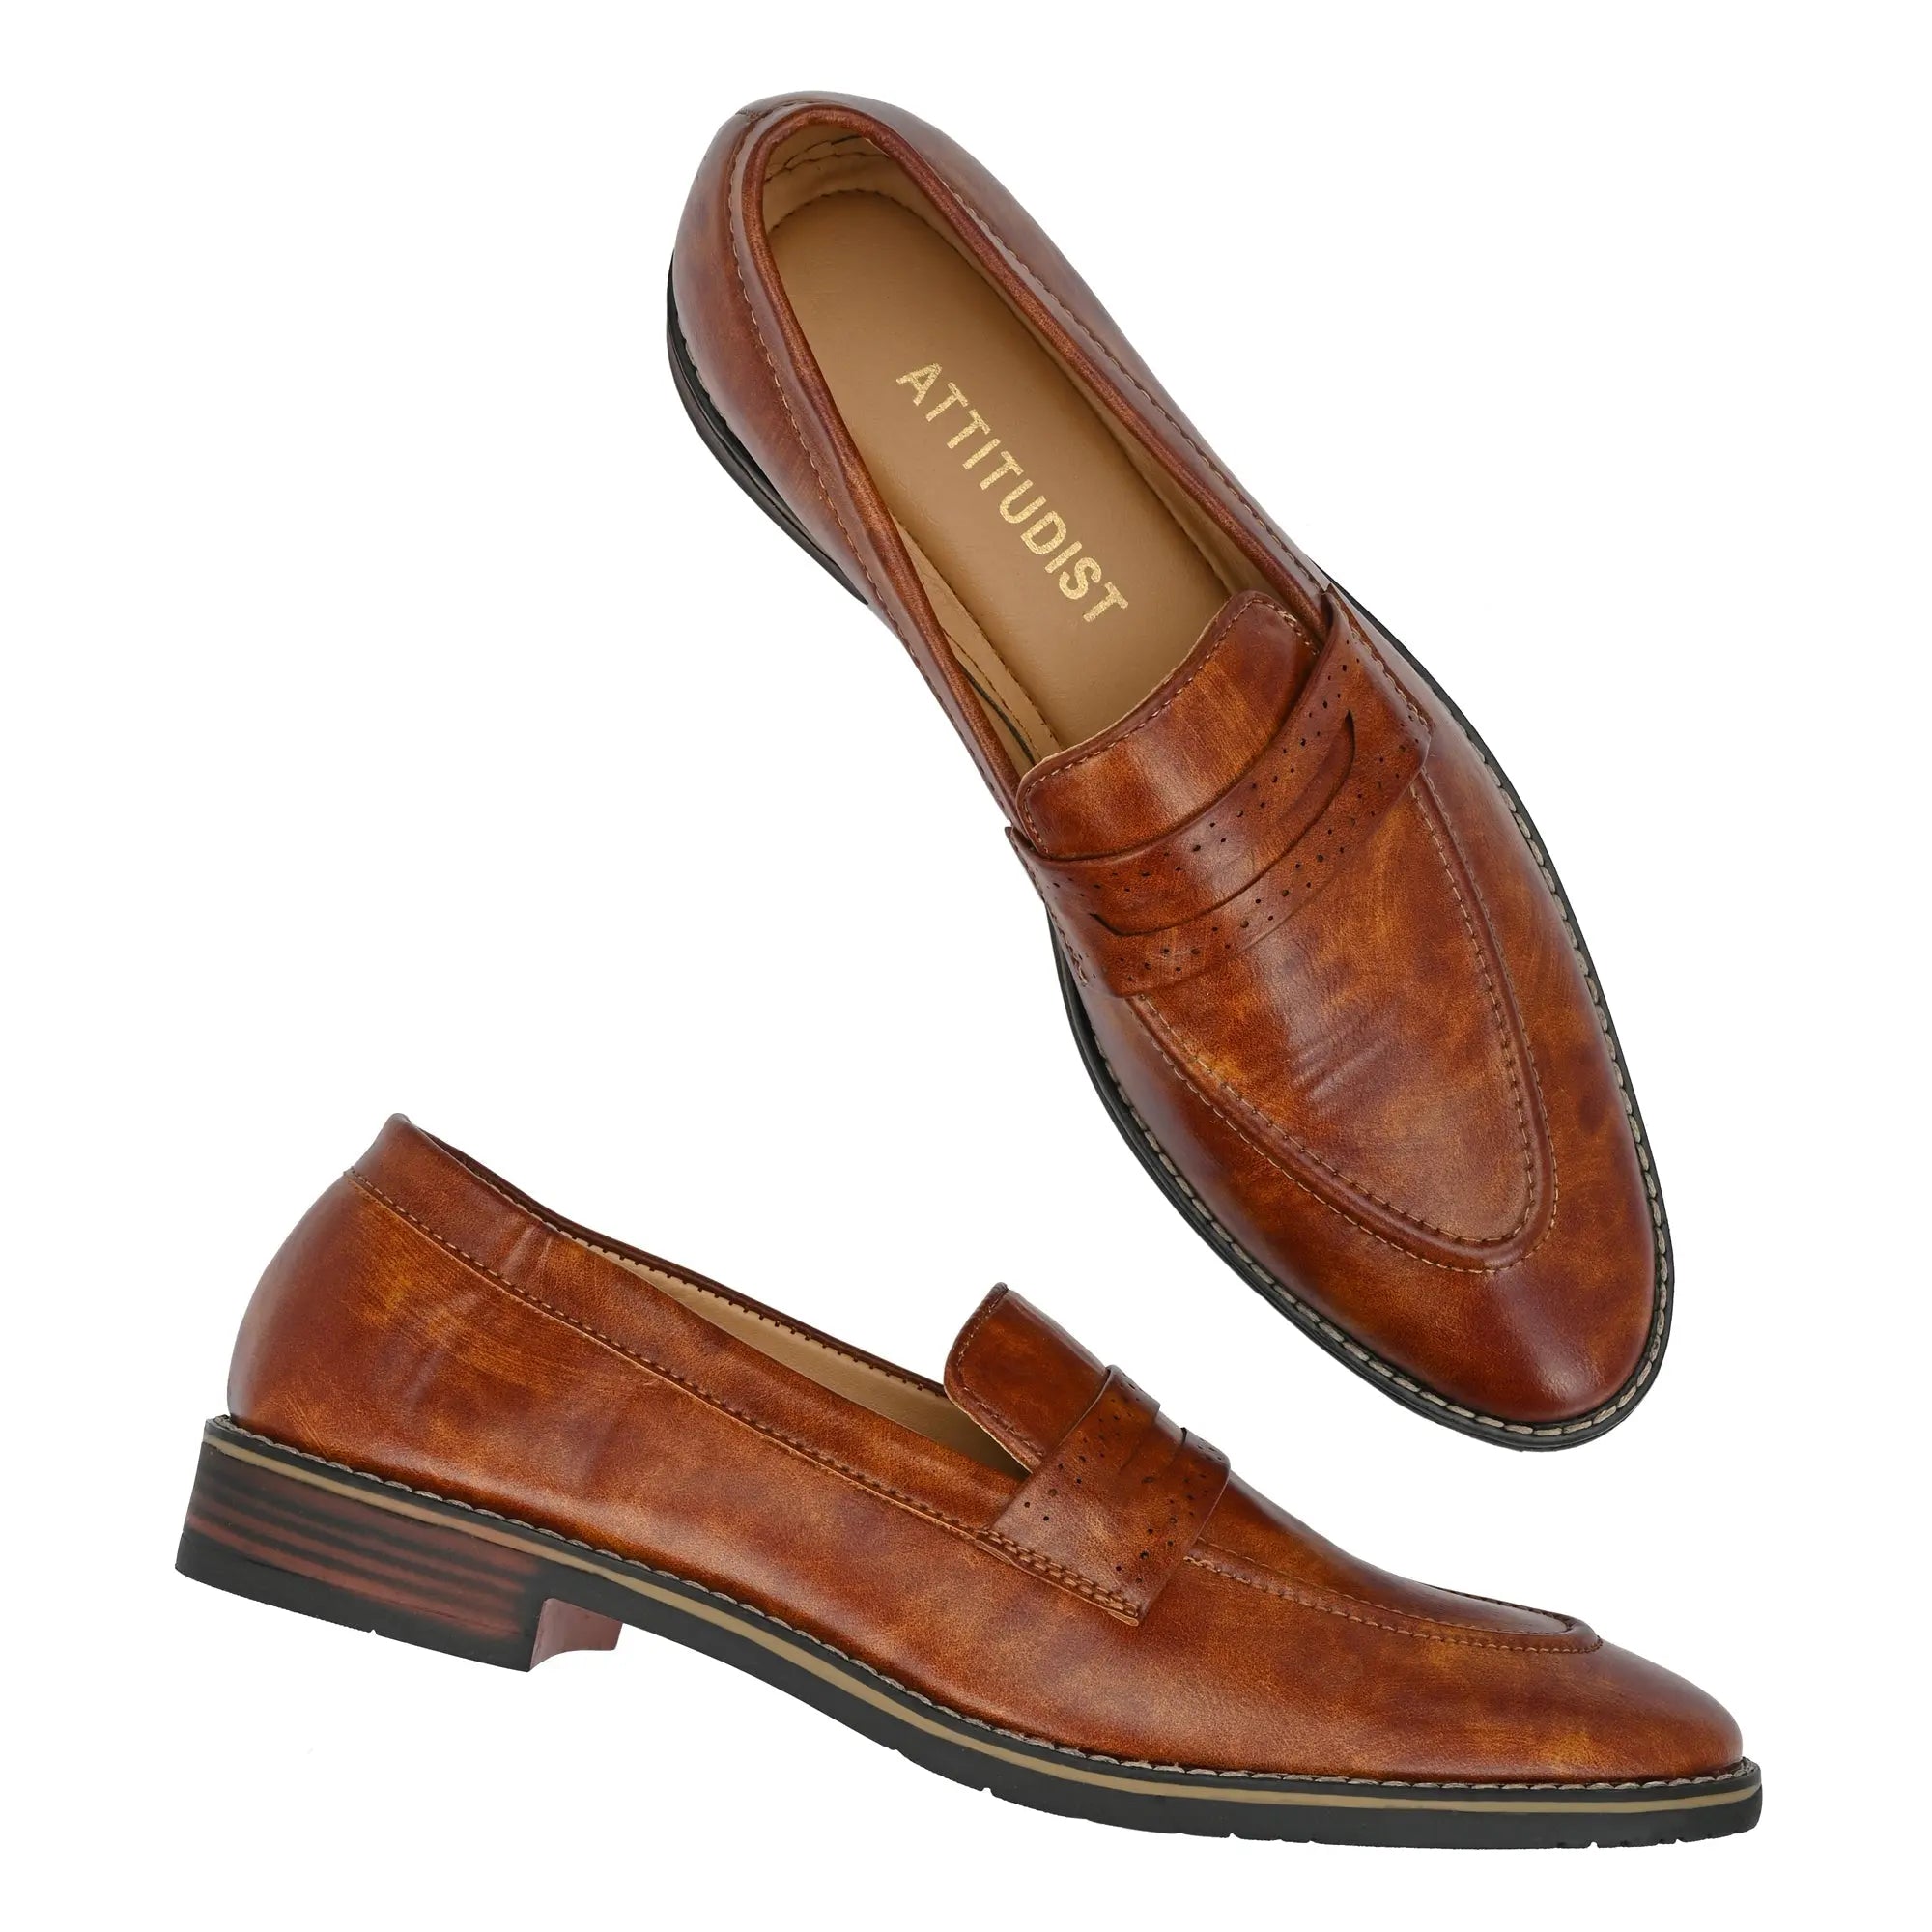 Attitudist Handcrafted Tan Plain Penny Slip On Round Toe Basket Loafer With Double Stitched Welts For Men MTOBSF